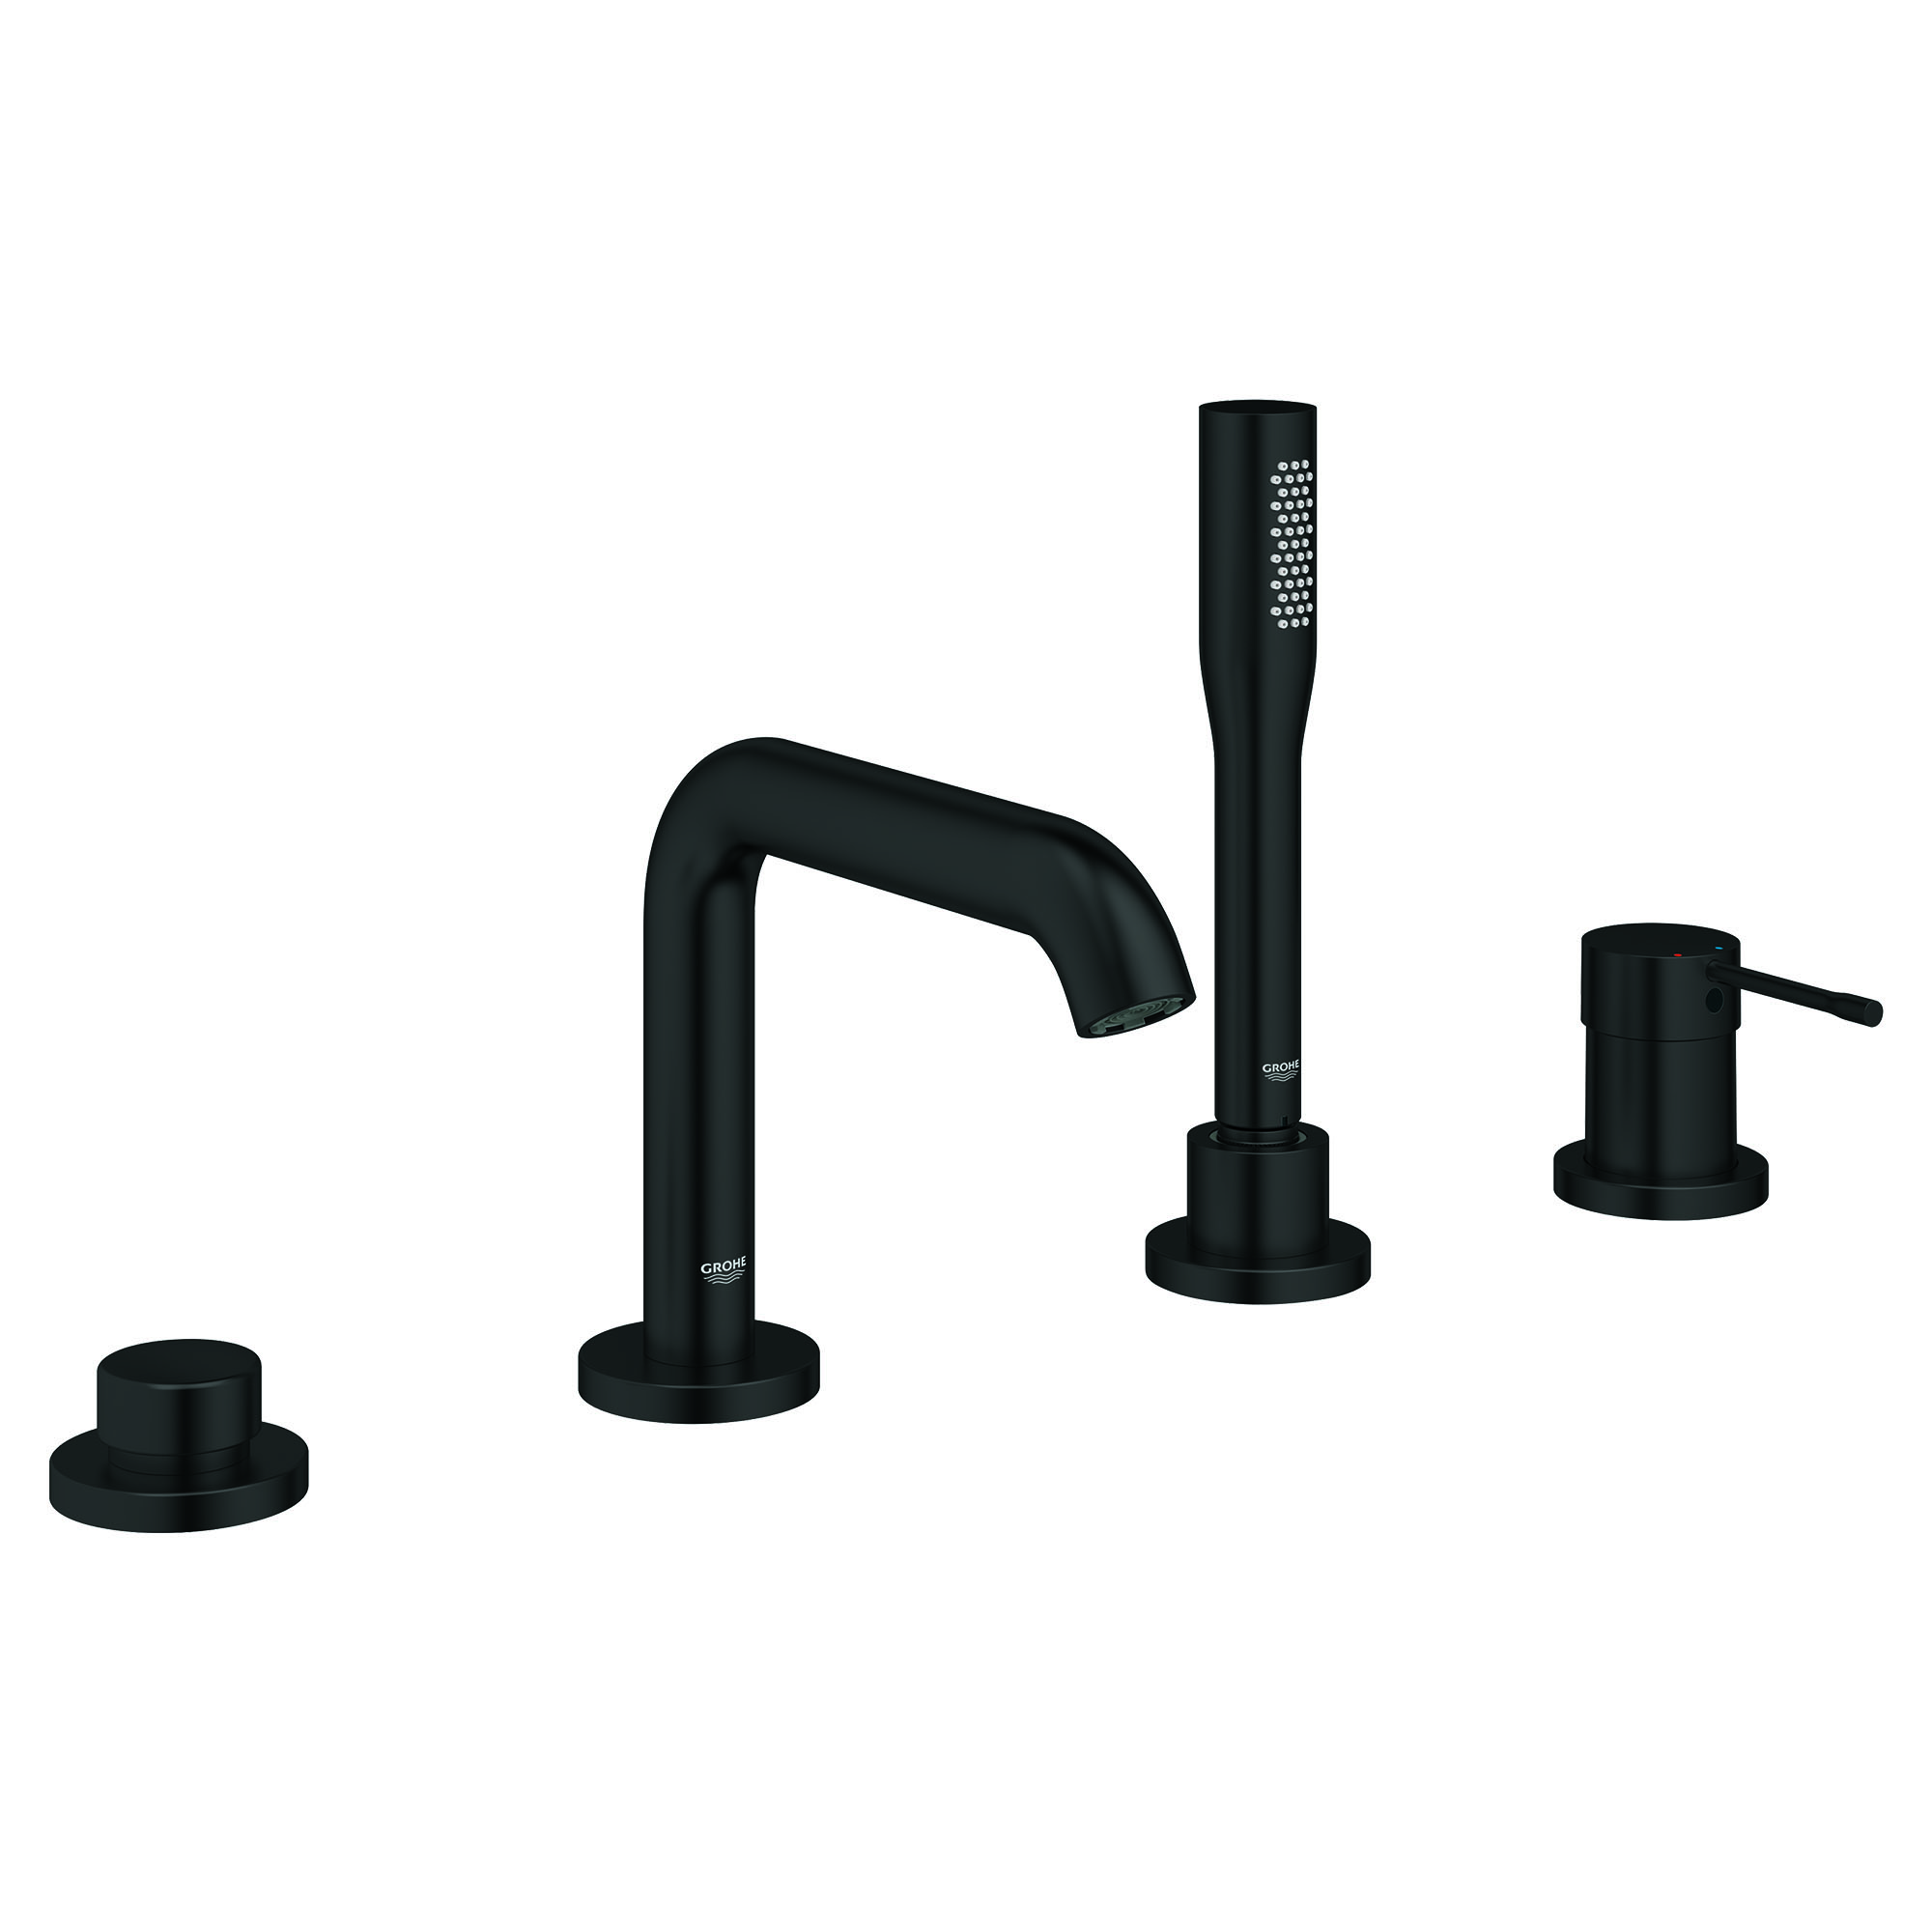 4-Hole Single-Handle Deck Mount Roman Tub Faucet with 6.6 L/min (1.75 gpm) Hand Shower